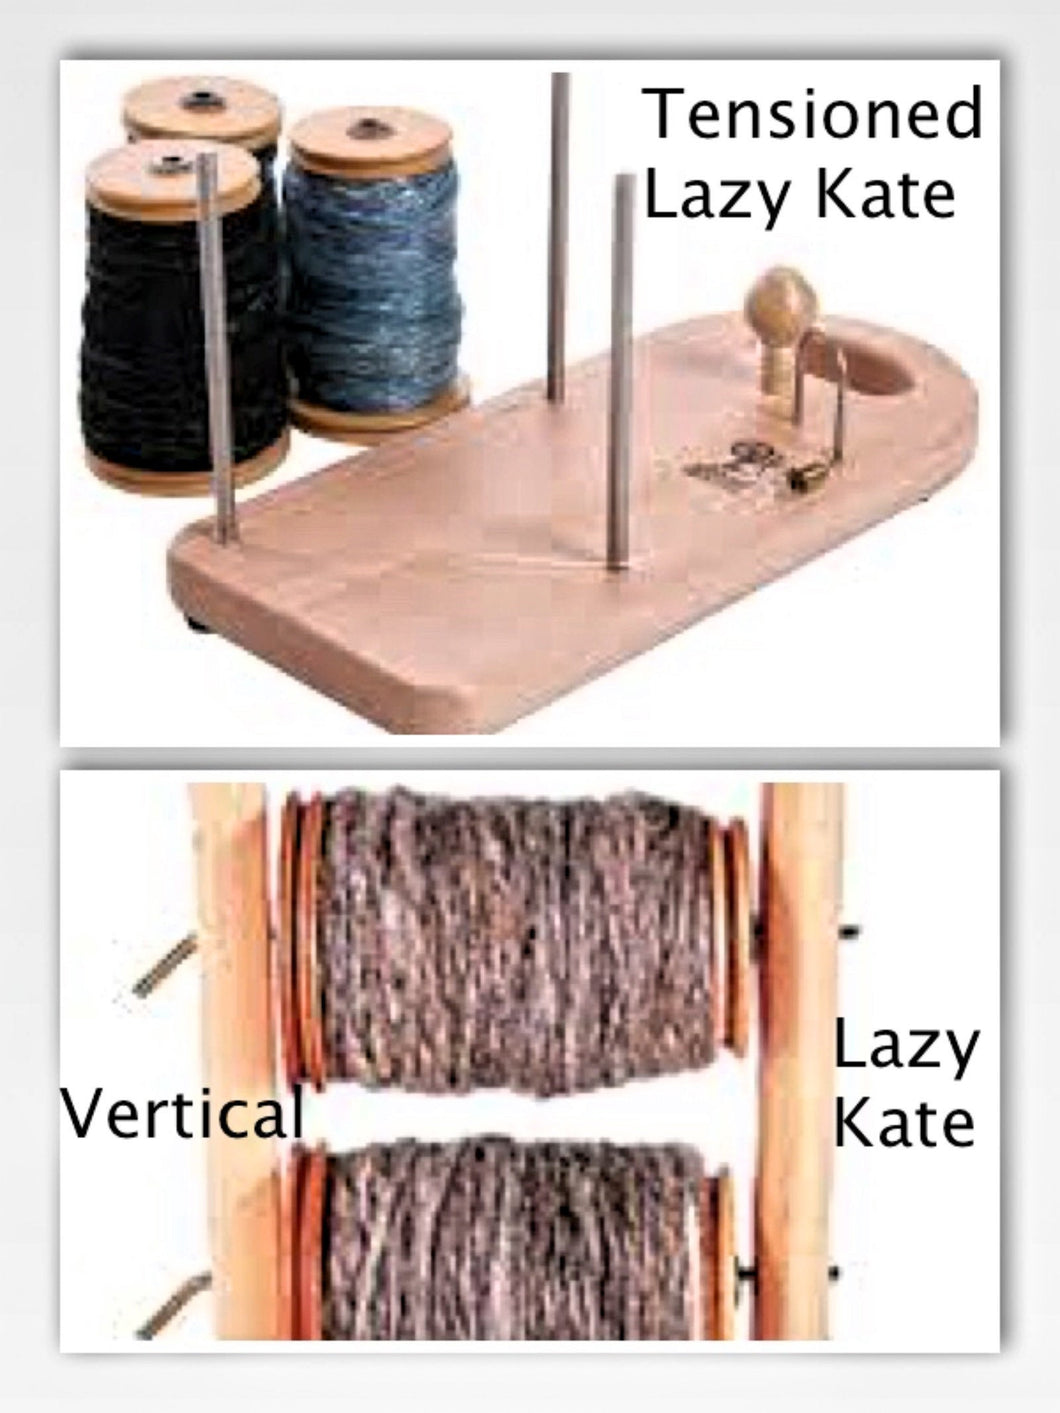 Ashford Lazy Kates Vertical or Tensioned